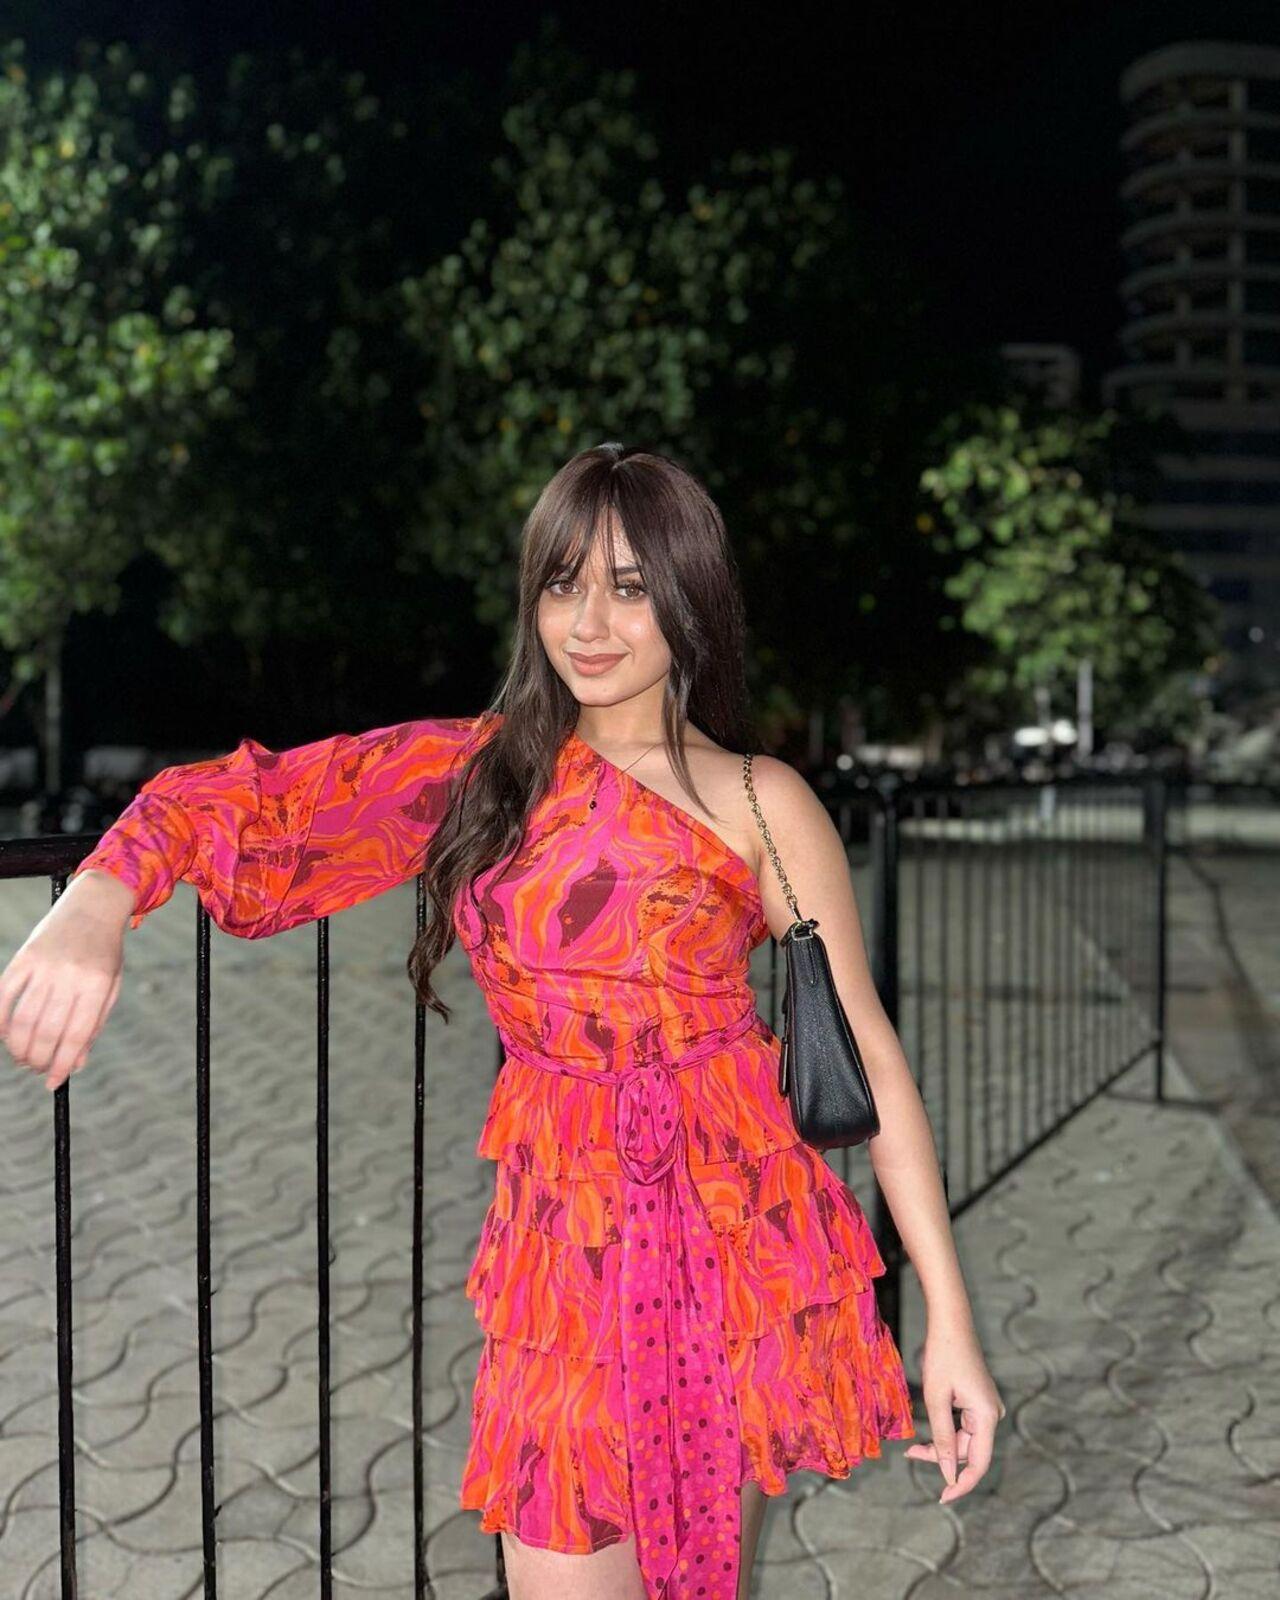 If you ever find yourself with party plans on the horizon, take a page out of Jannat Zubair's book. Opt for a pretty pink dress, let your hair flow, and don't forget those timeless bangs